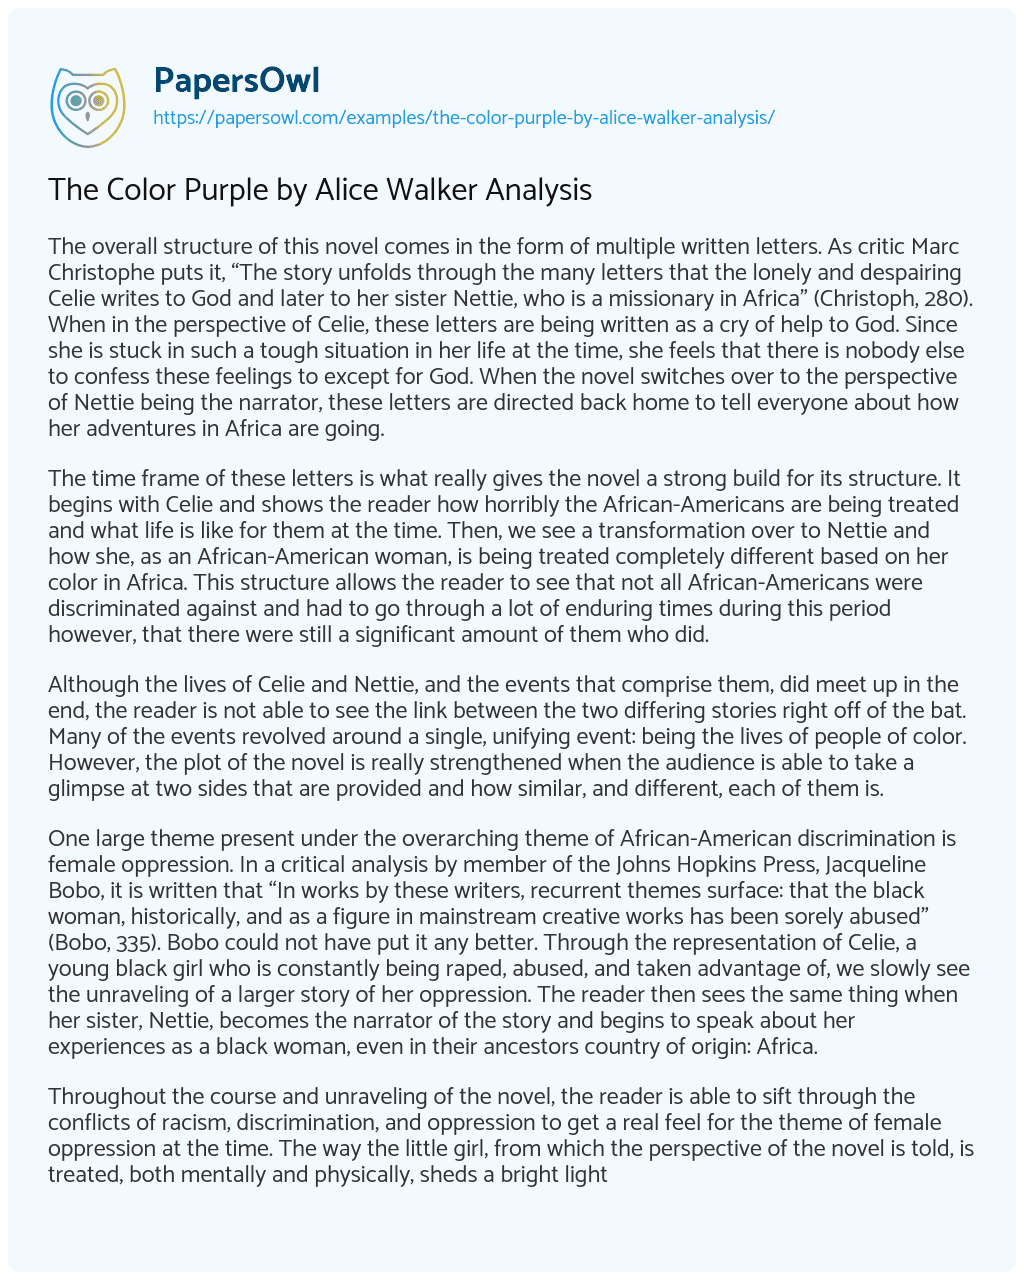 The Color Purple by Alice Walker Analysis essay